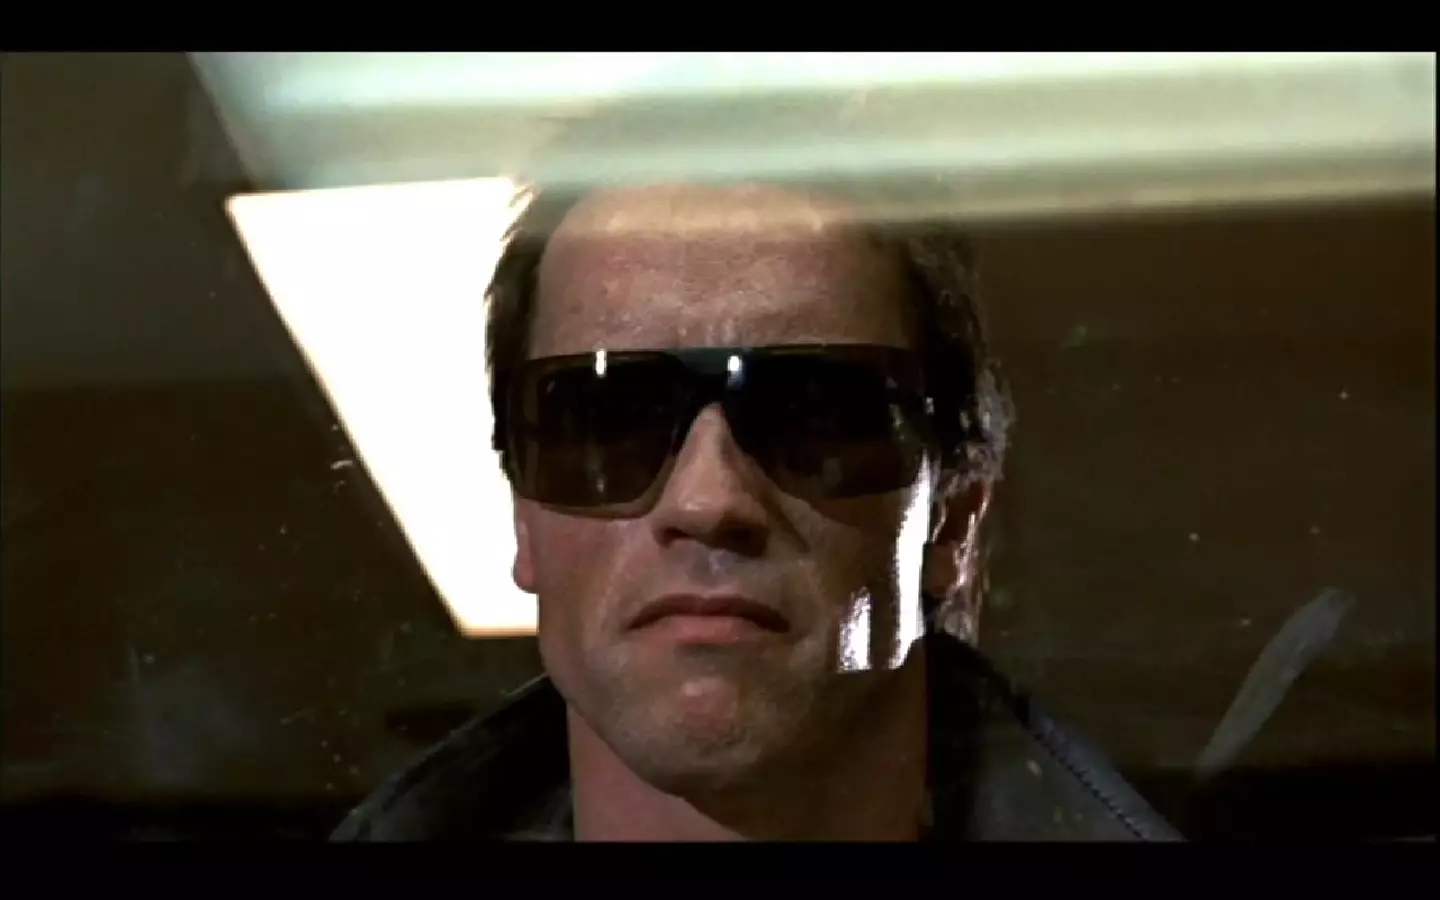 'I'll be back' became The Terminator's iconic line.